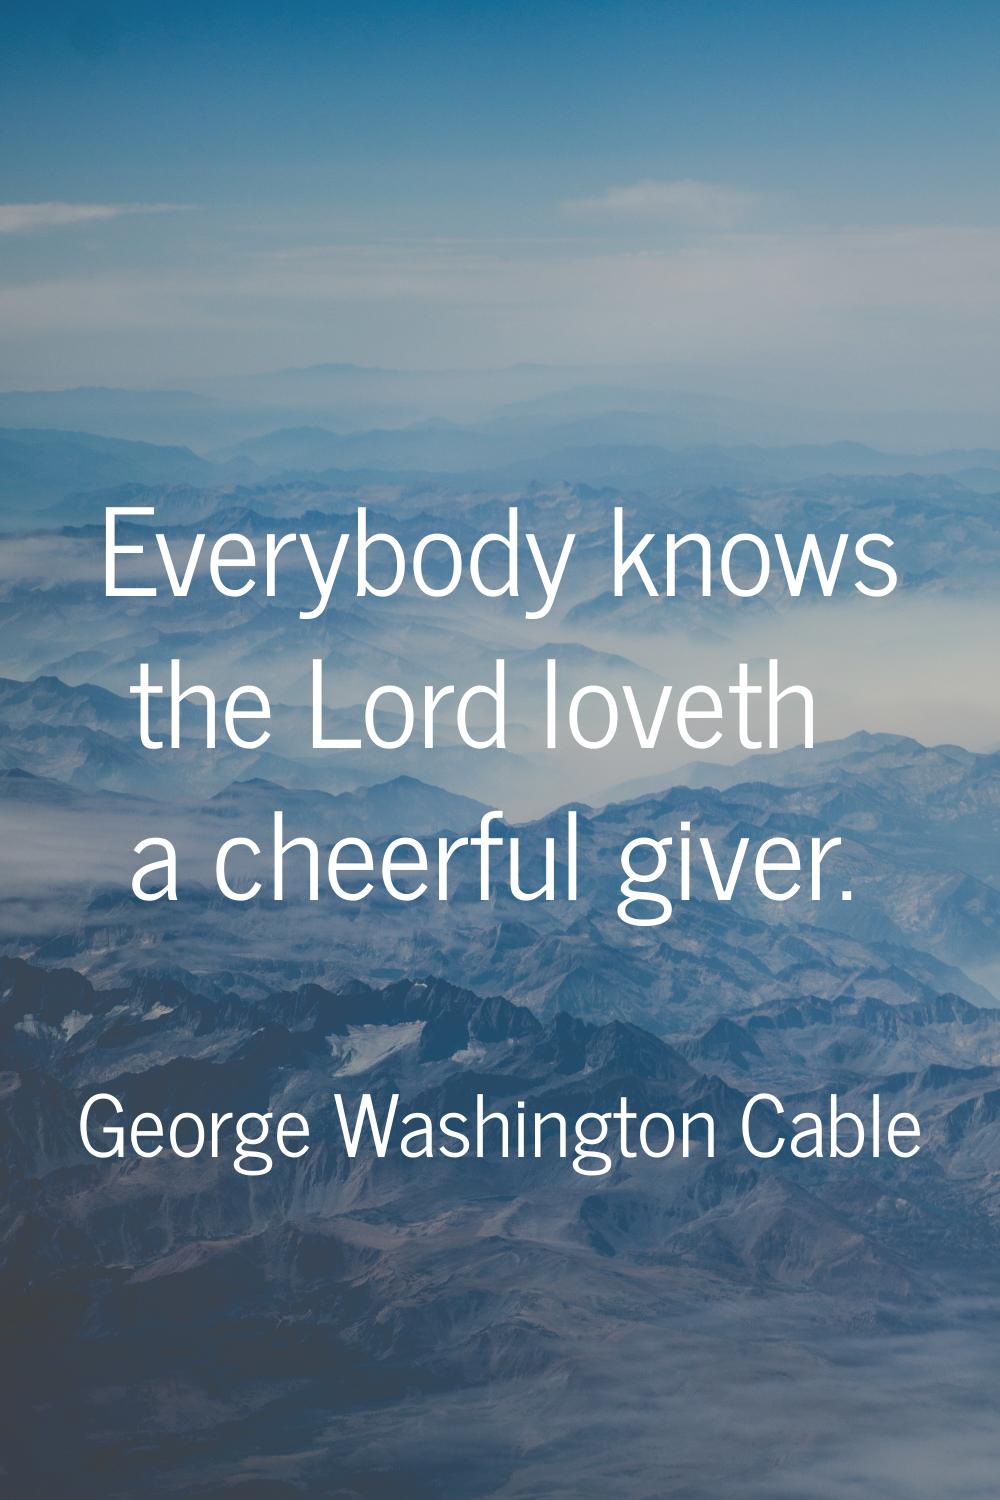 Everybody knows the Lord loveth a cheerful giver.